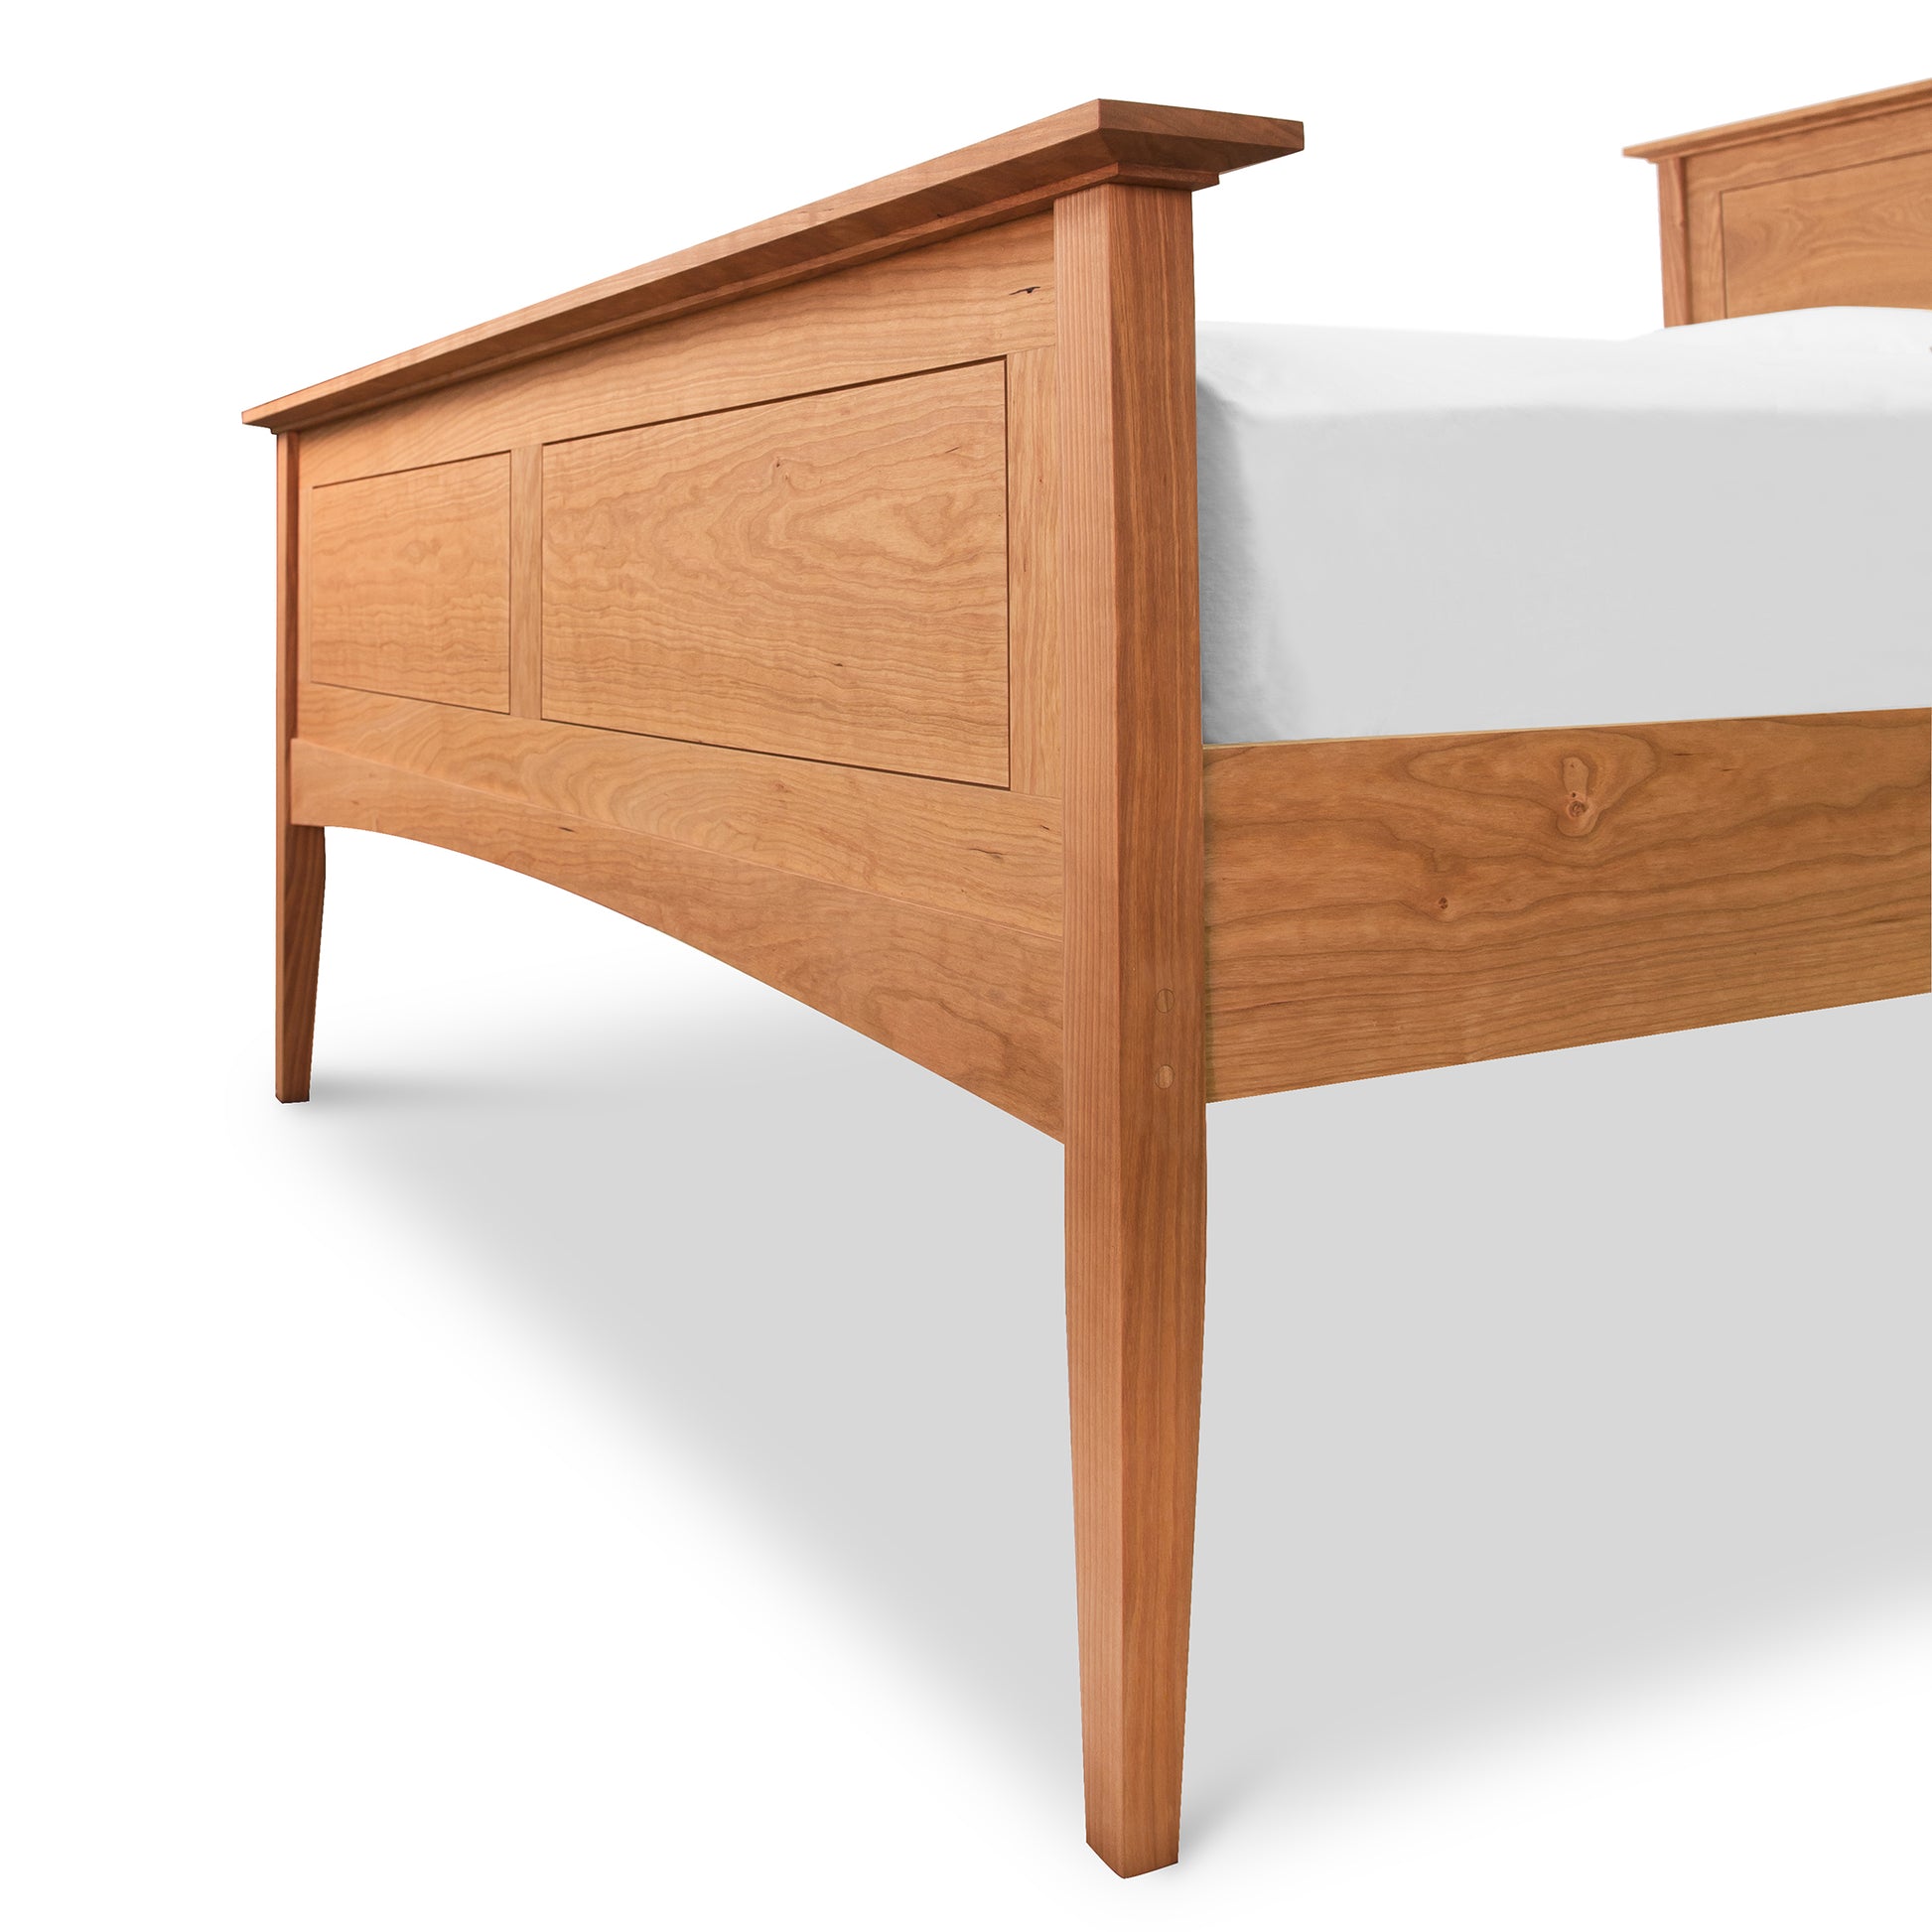 A wooden bed frame, handmade from sustainably harvested woods, with a prominent headboard featuring Shaker panel details and simple, streamlined legs, set against a white background. The bed is partially covered by the American Shaker Panel Bed by Maple Corner Woodworks.